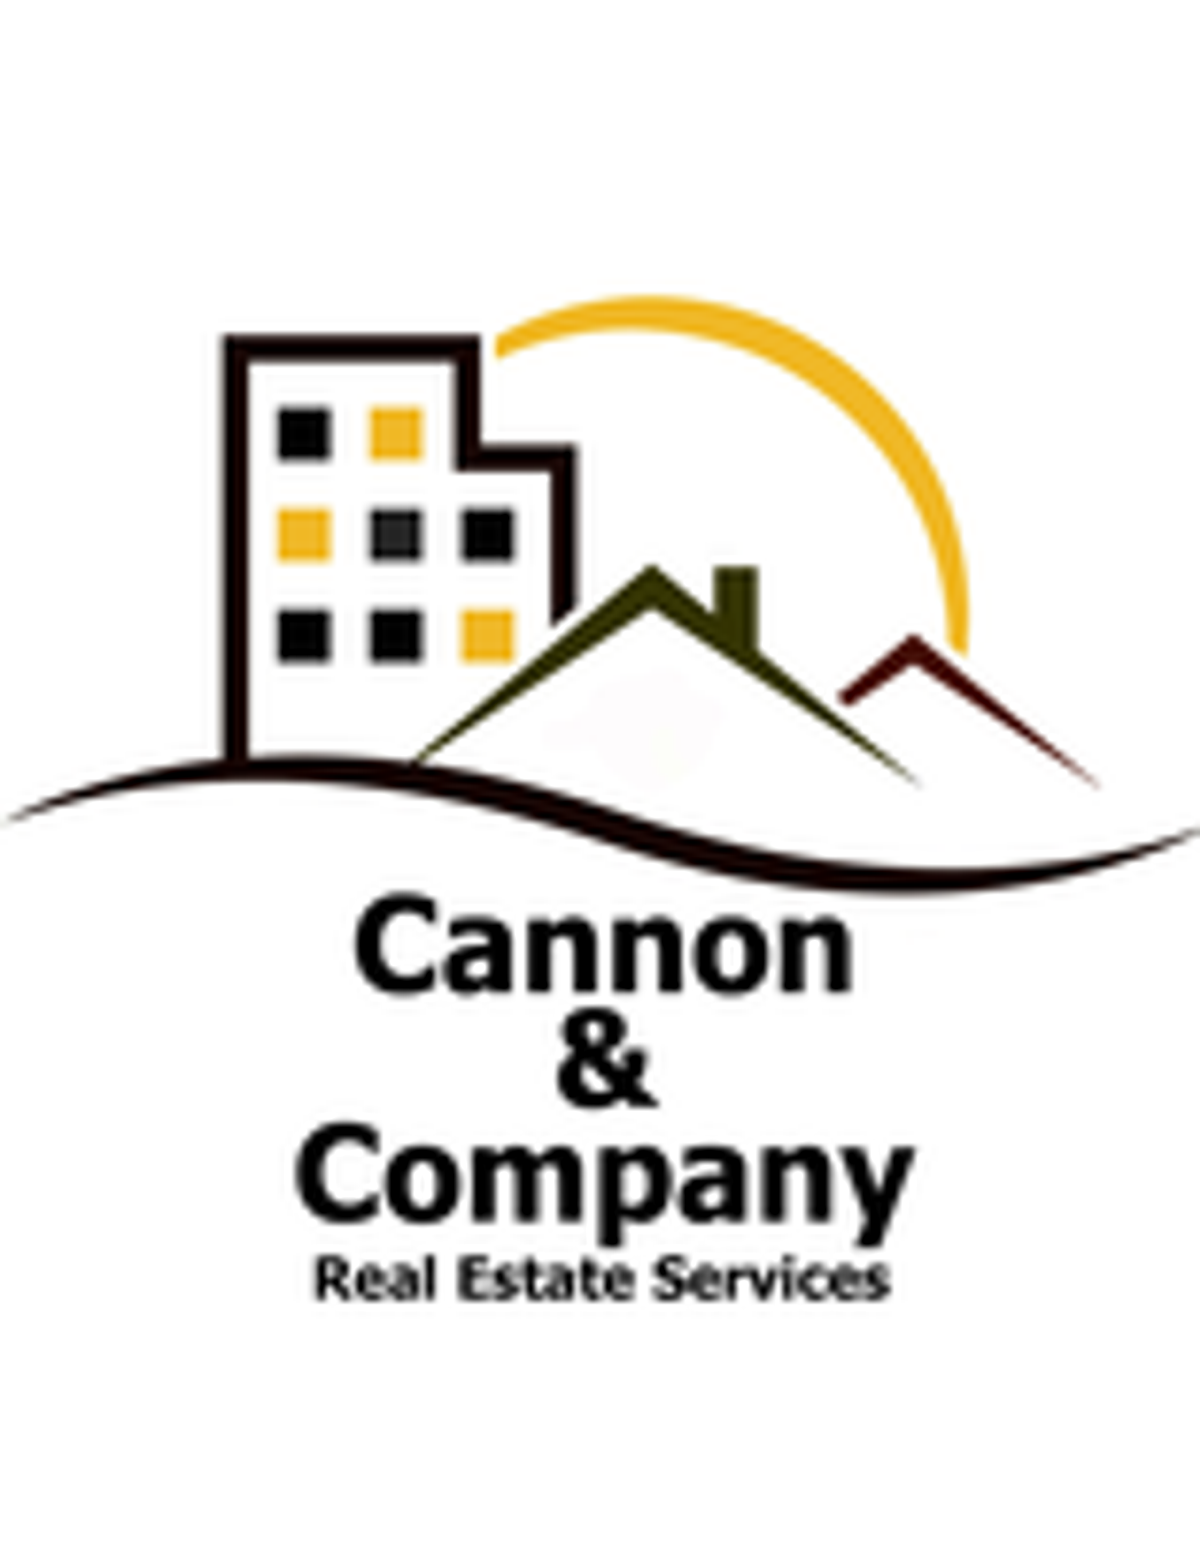 Photo for Carolee Mecham, Listing Agent at Cannon & Company